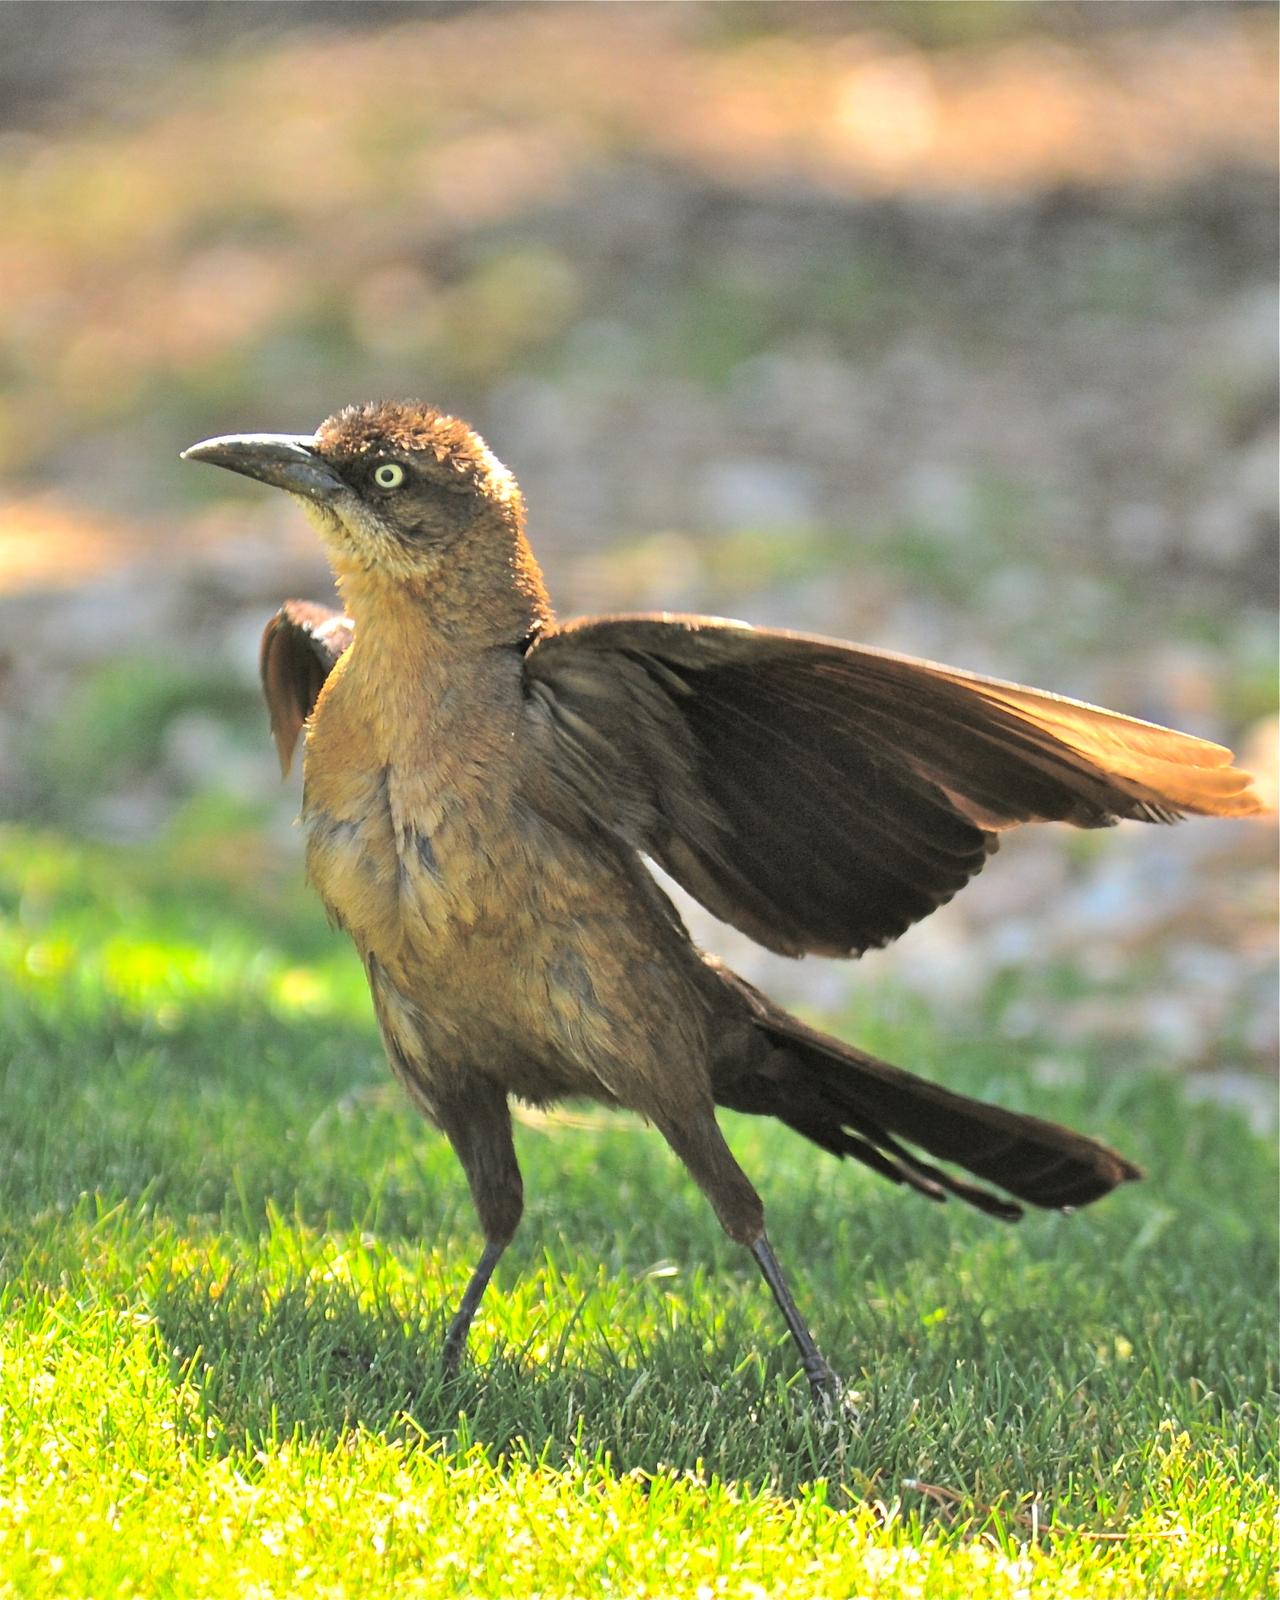 Great-tailed Grackle Photo by Gerald Friesen